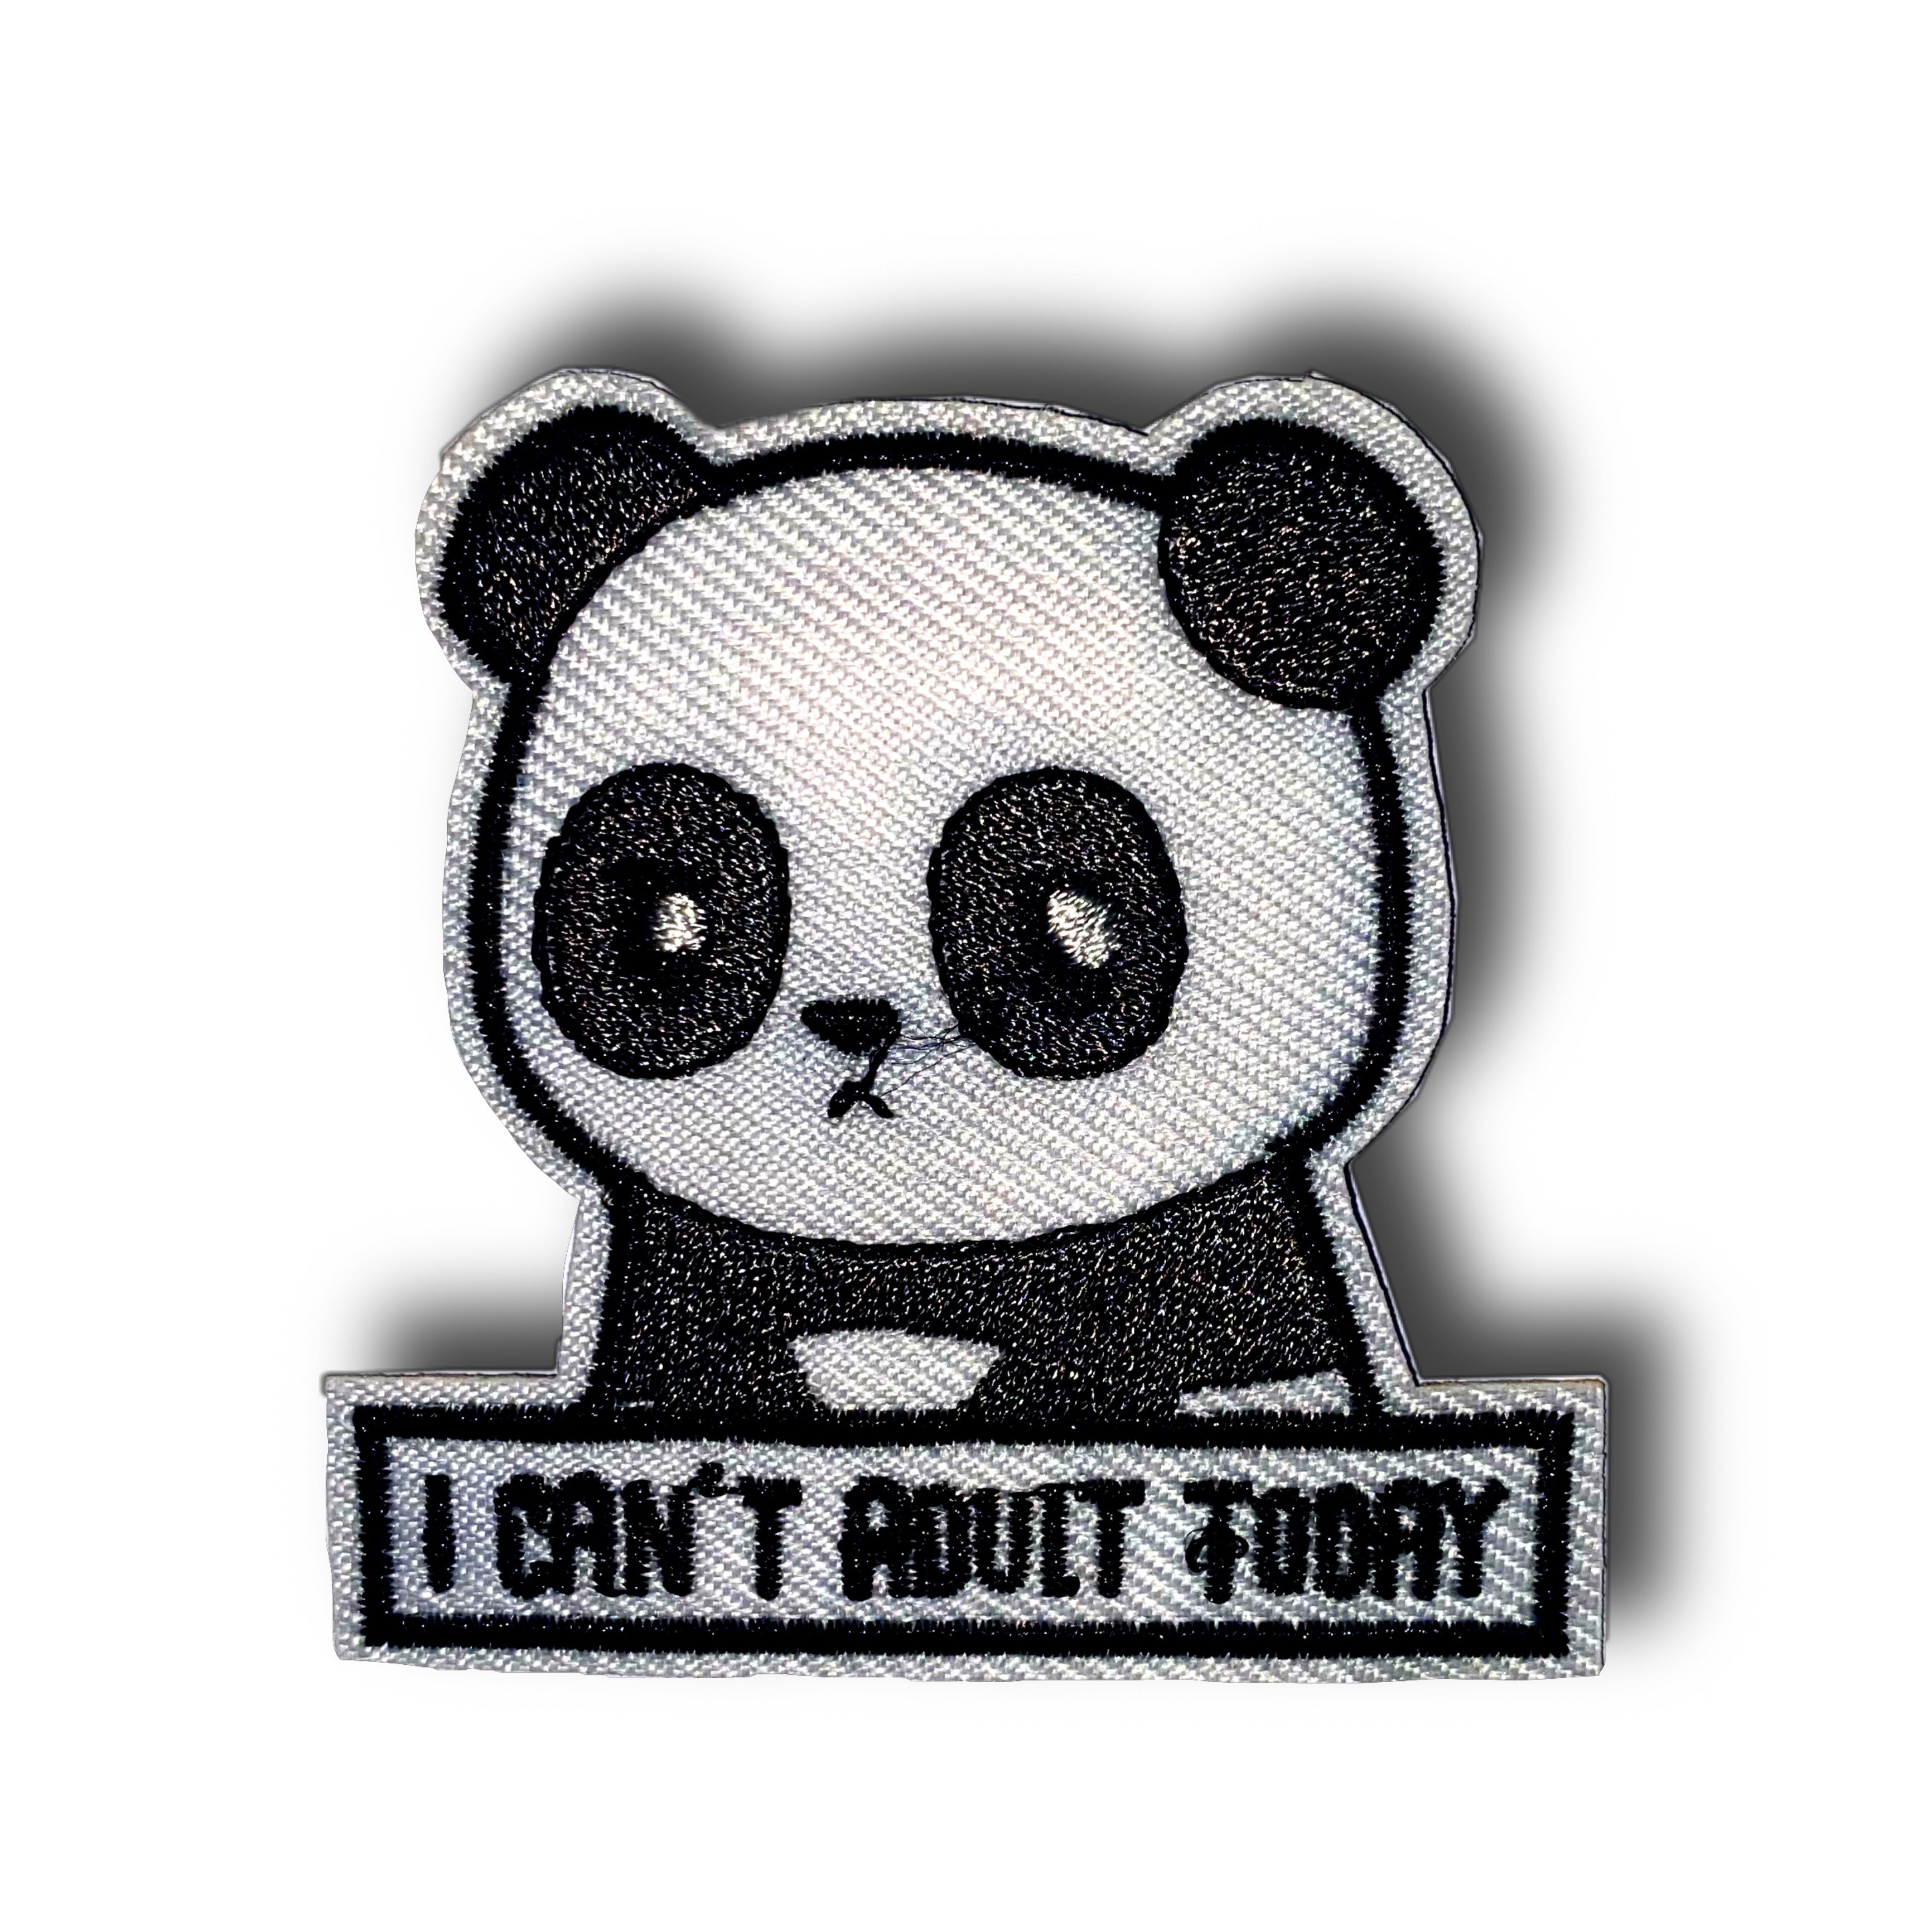 I Can't Adult Today Panda Iron On Patch